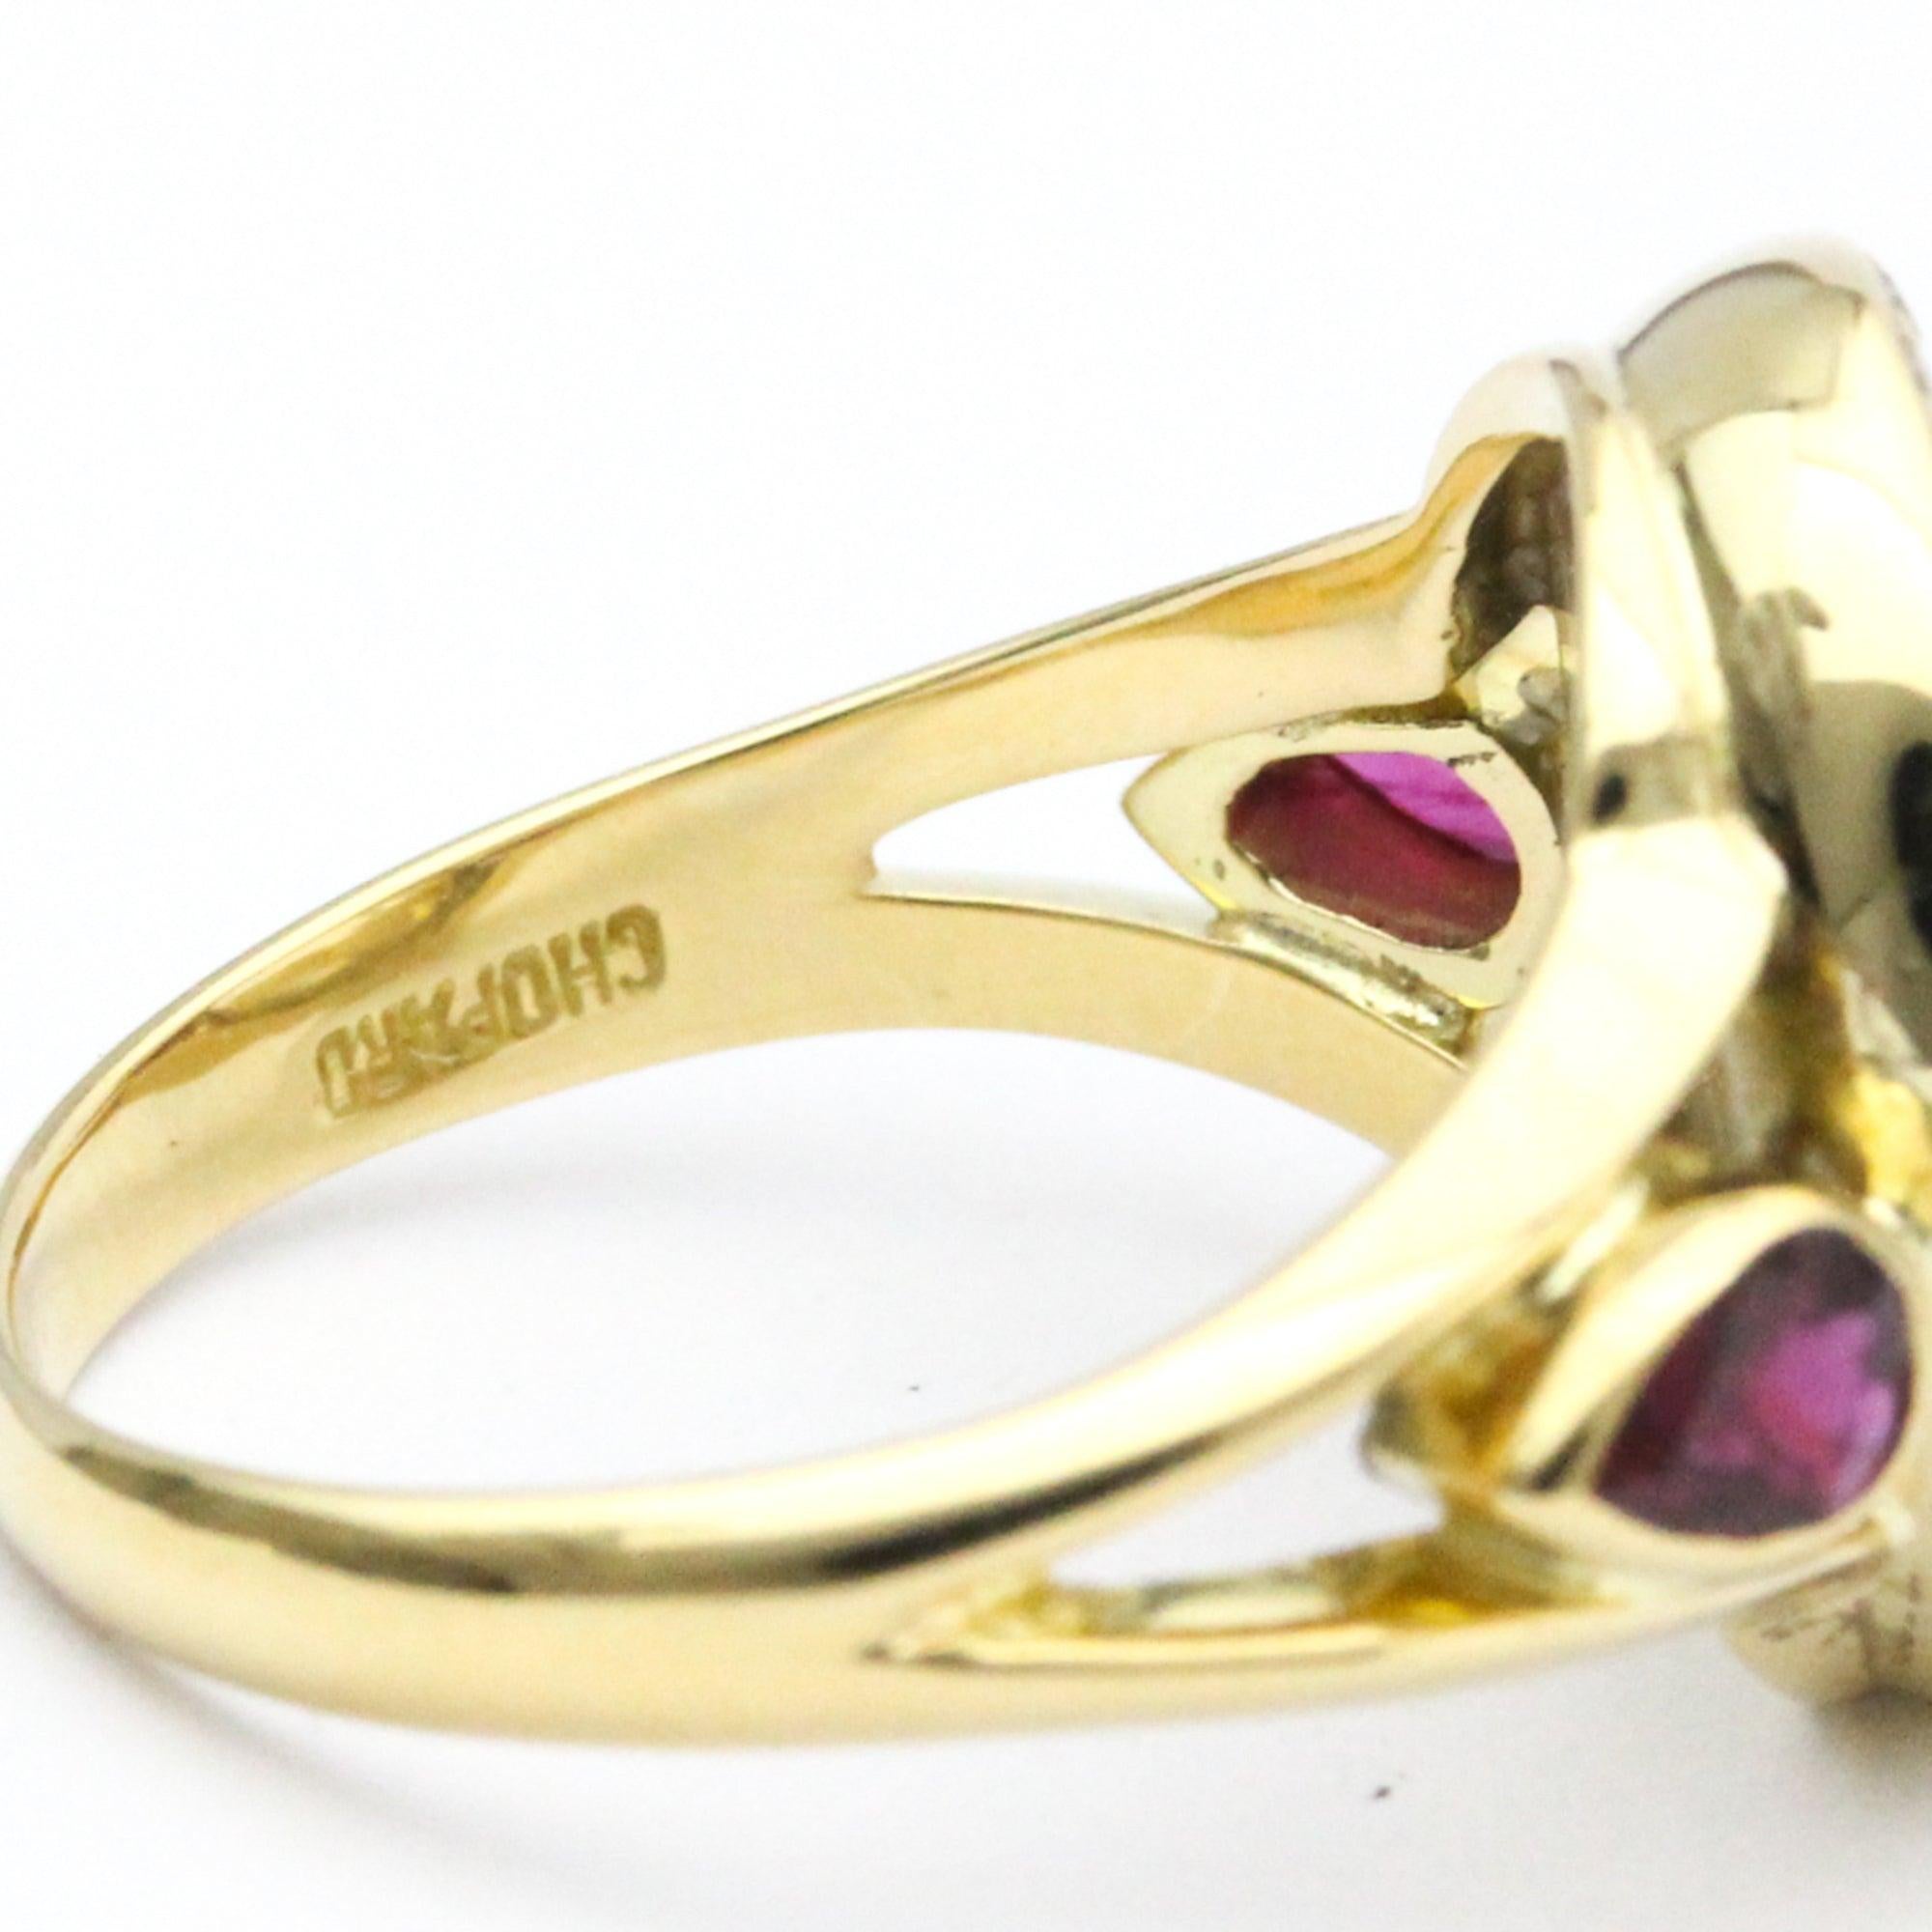 Chopard Oval Diamond, Ruby Band Ring in 18K Yellow Gold 3